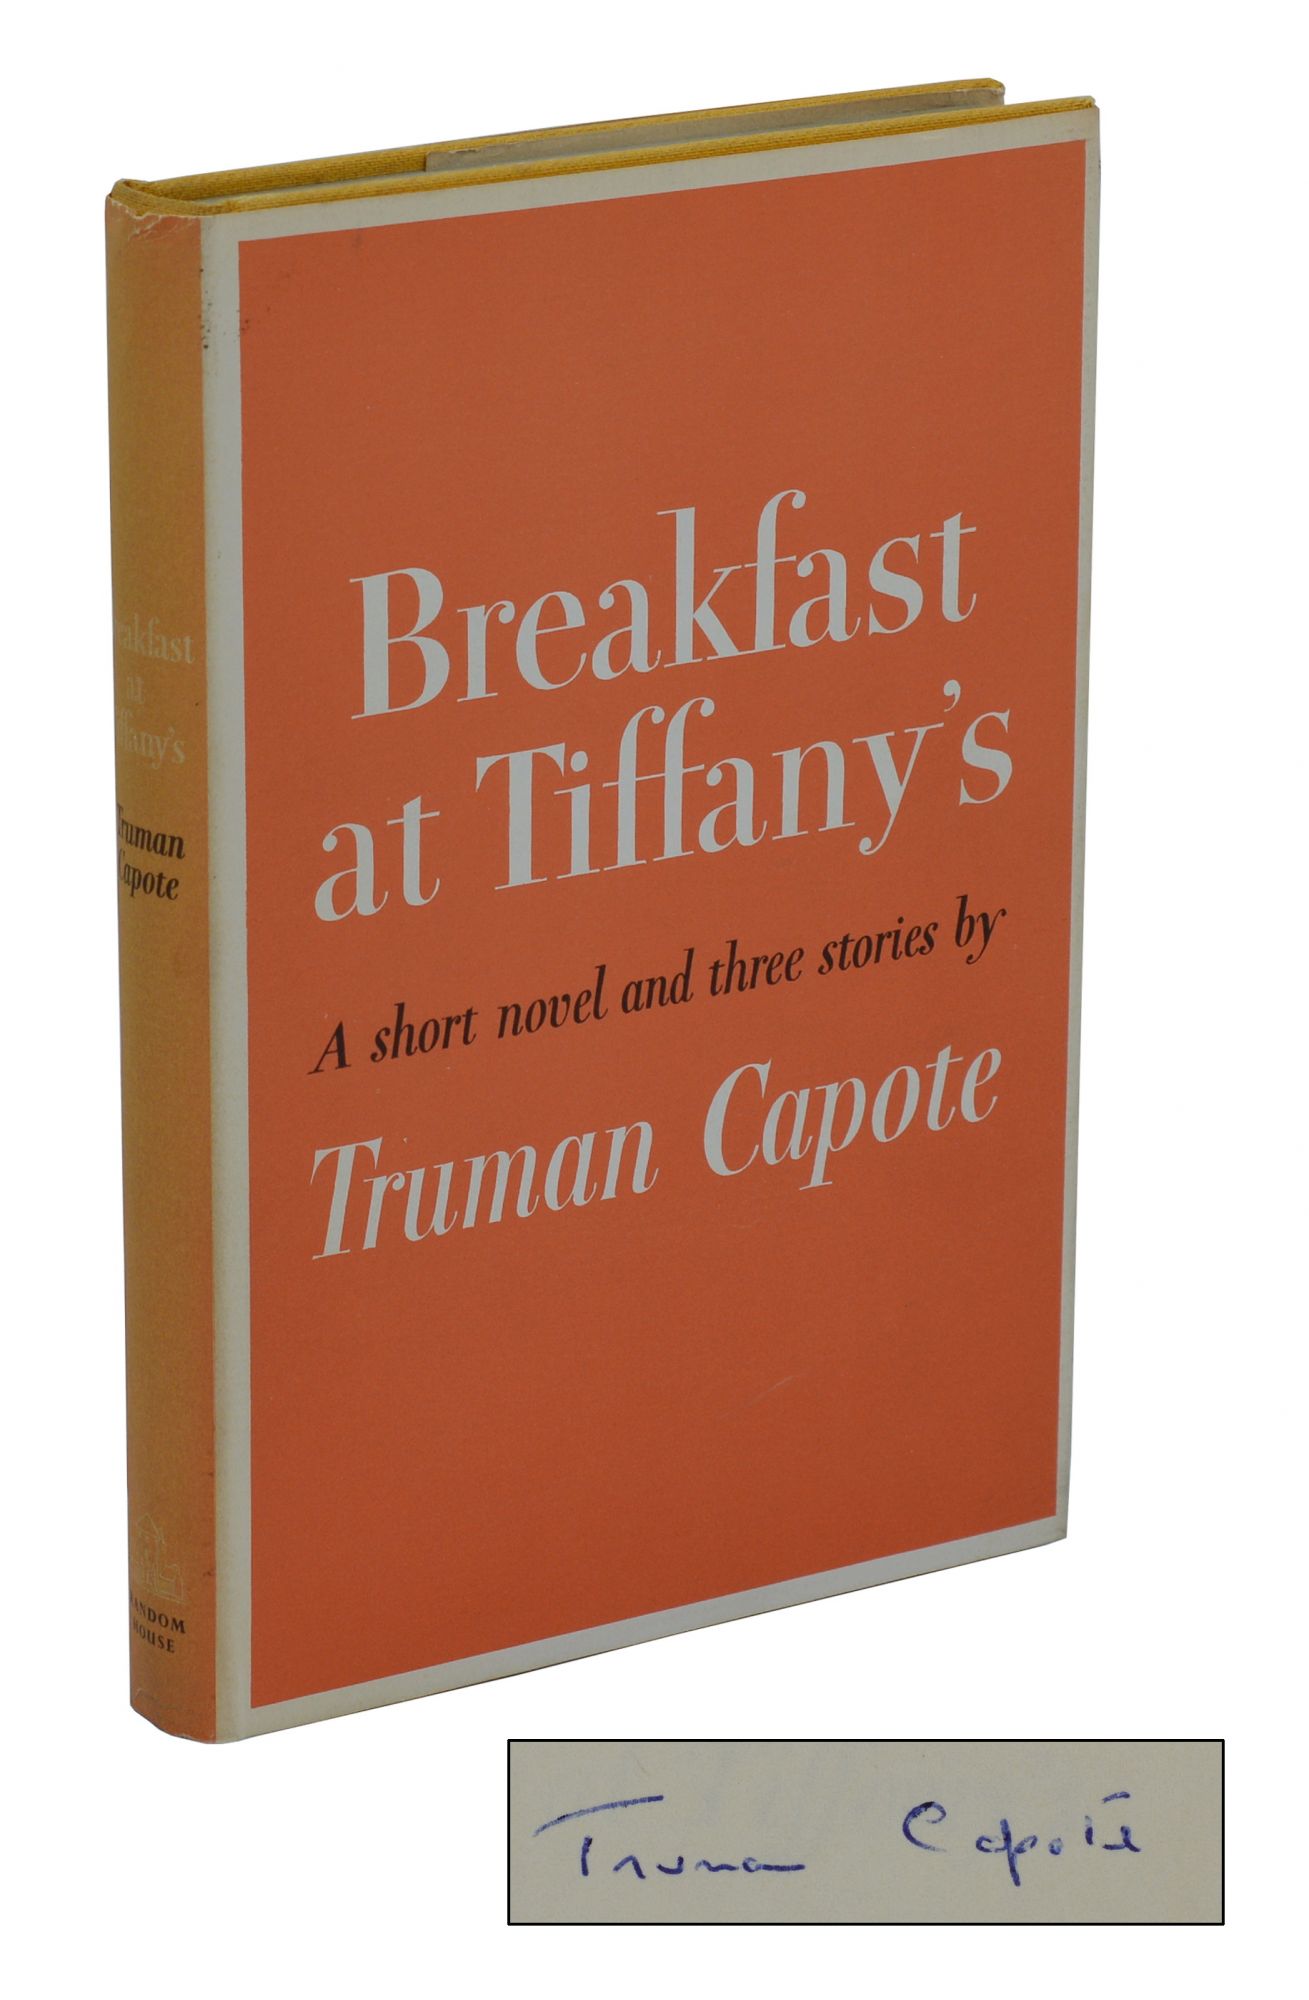 breakfast at tiffany's book review